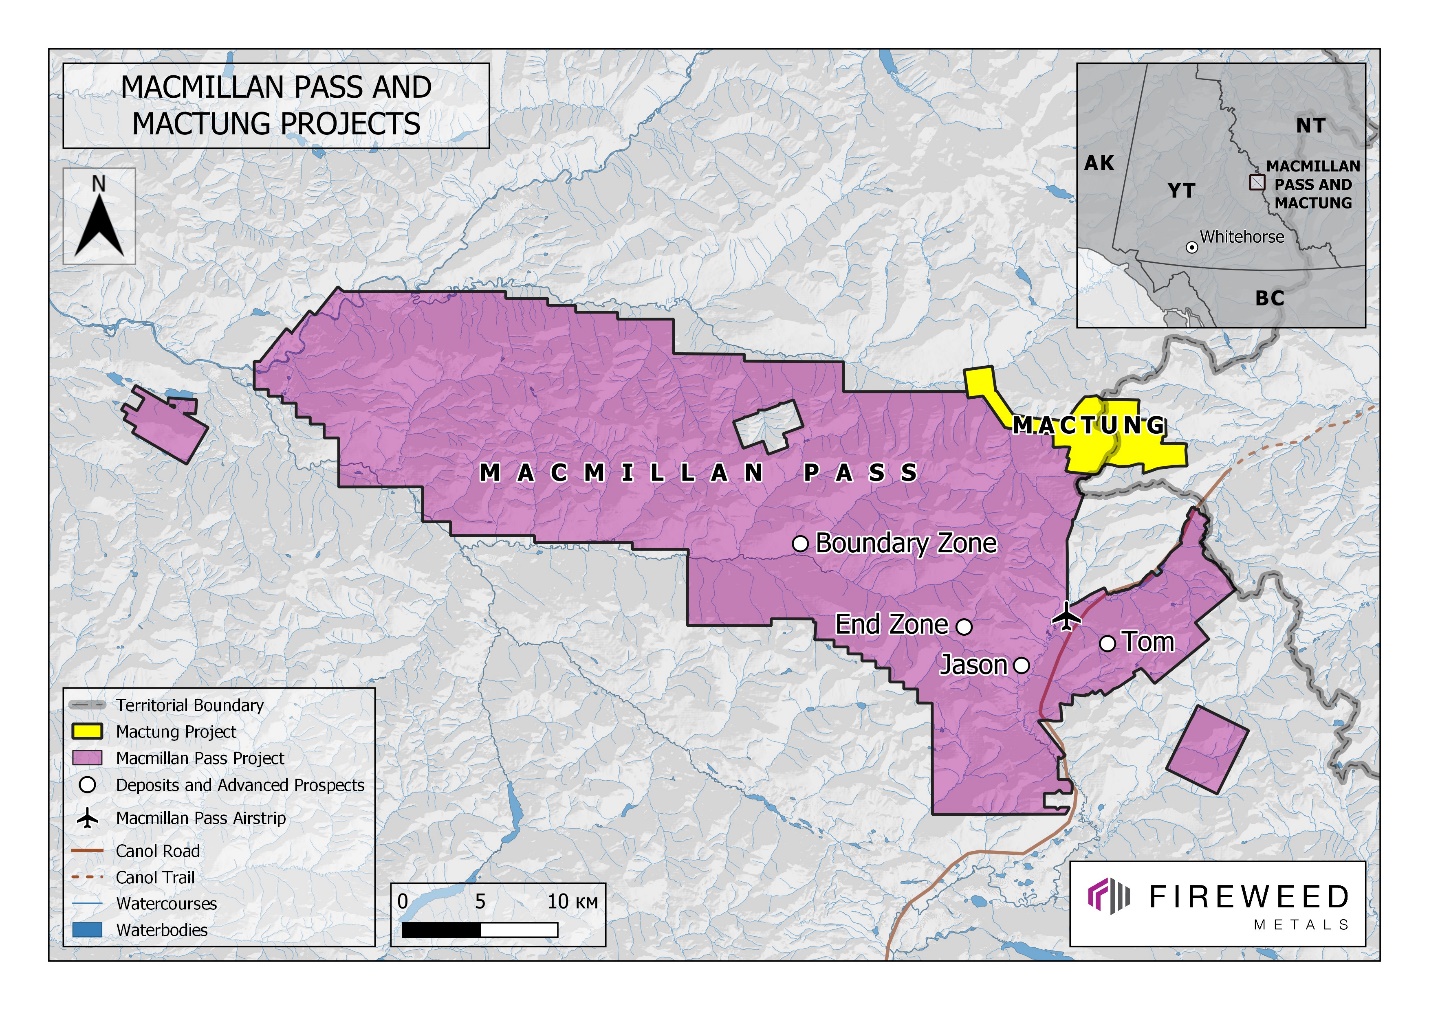 A colored map showing the Macmillian Pass Project in purple and Mactung Project in yellow.